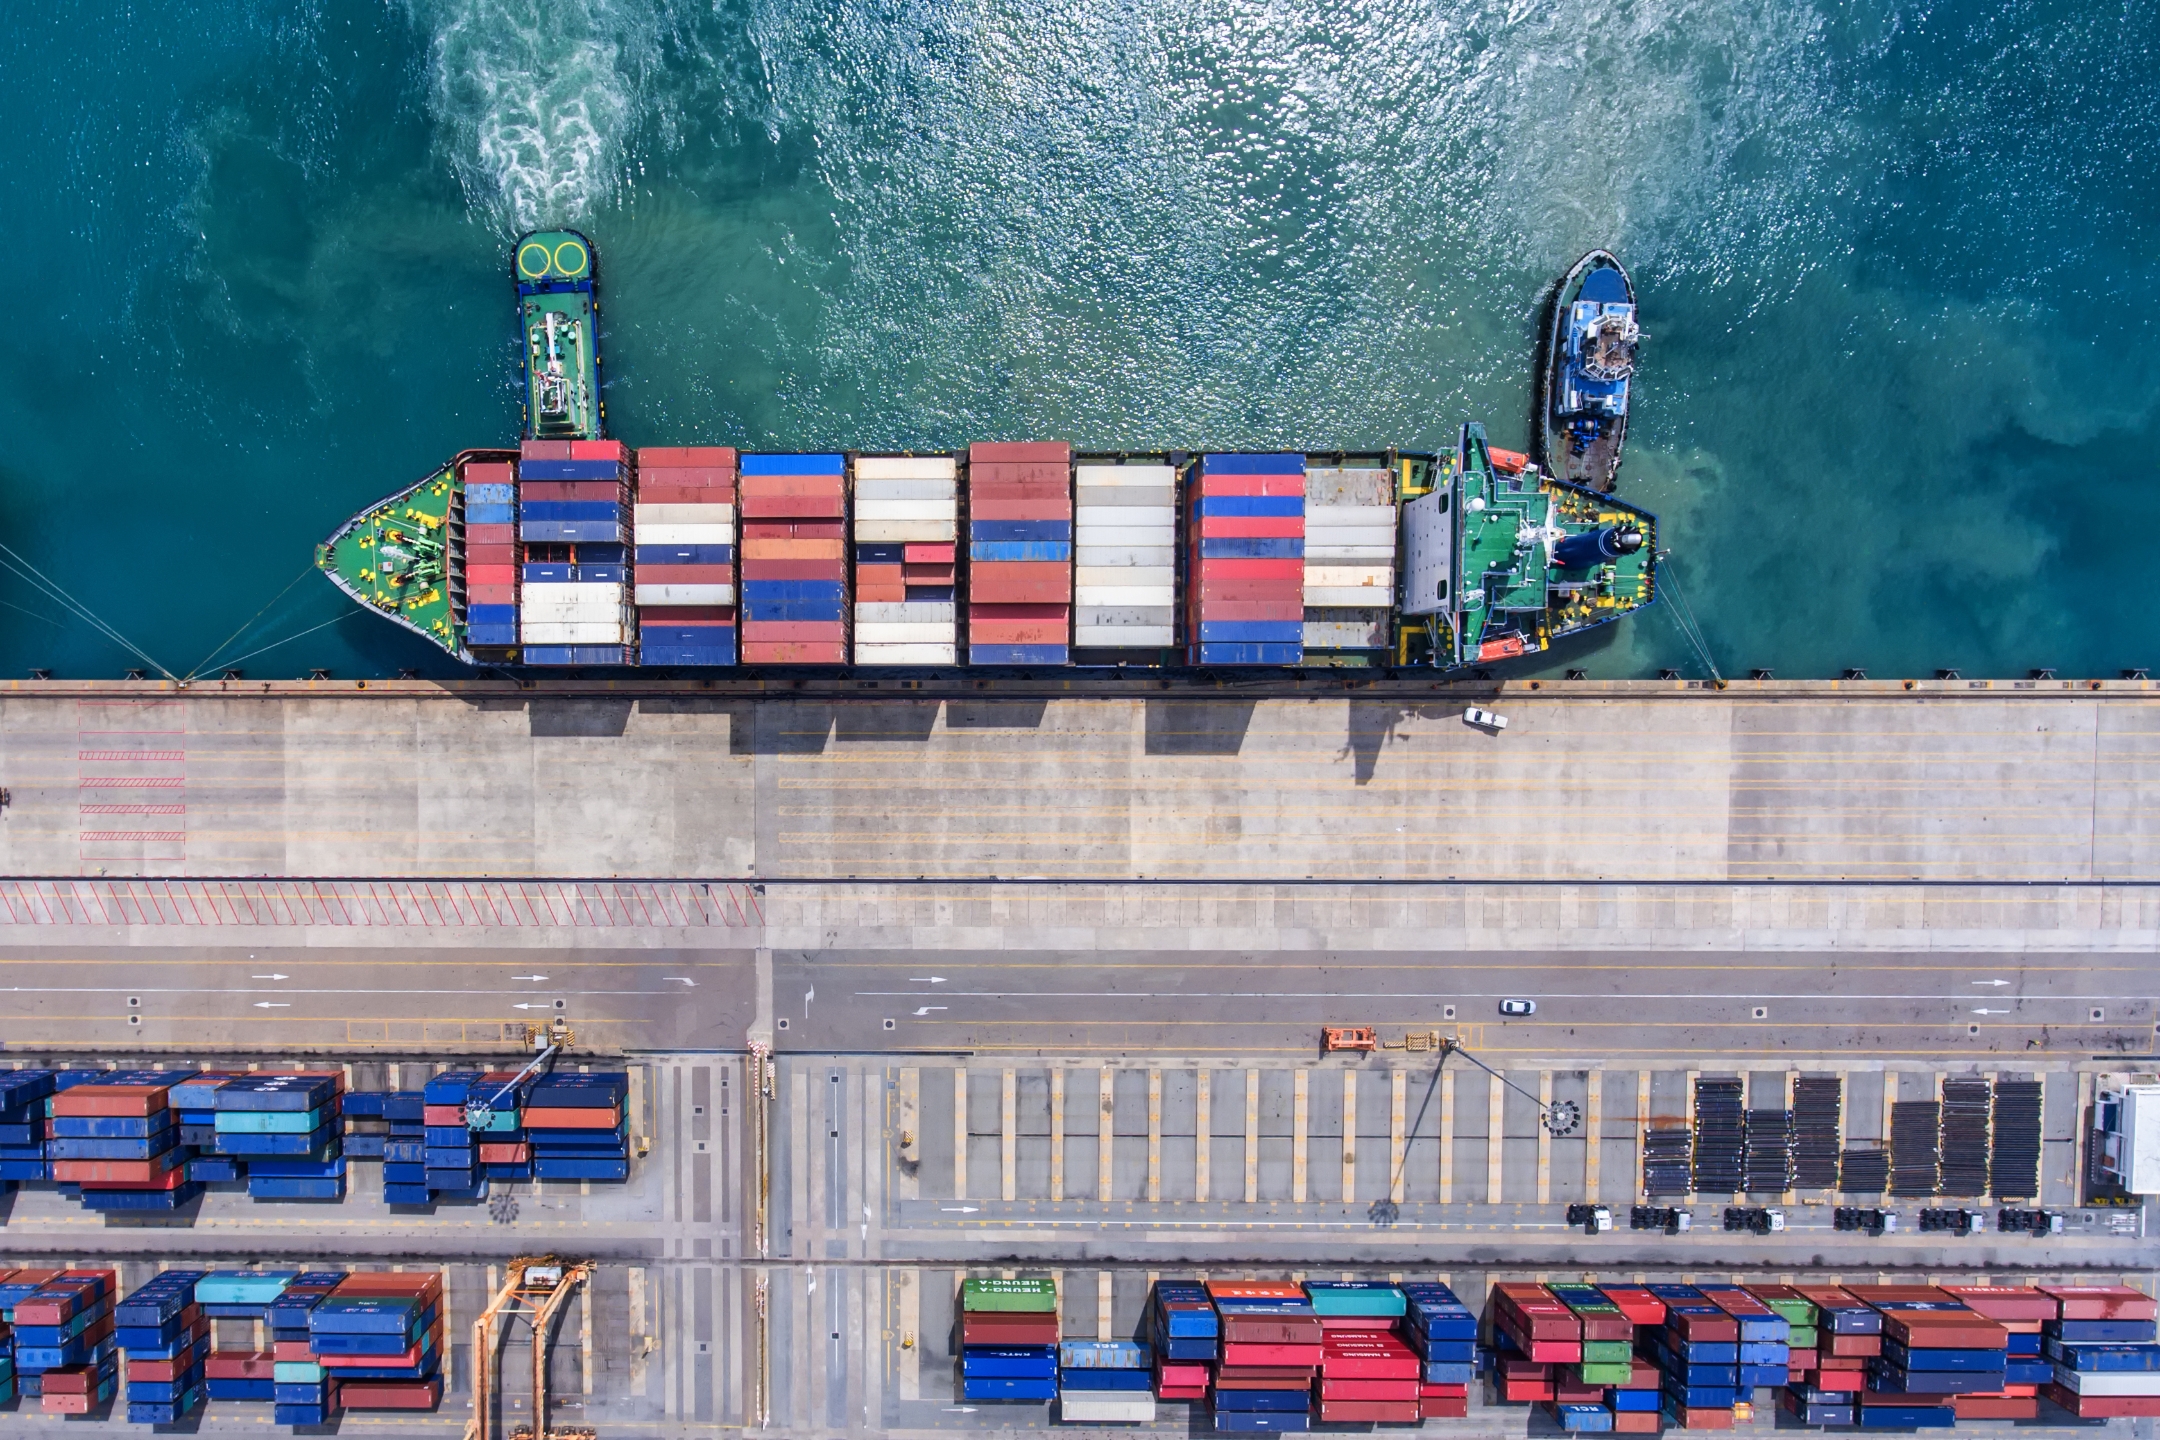 Aerial view of a container ship docked alongside a harbor.